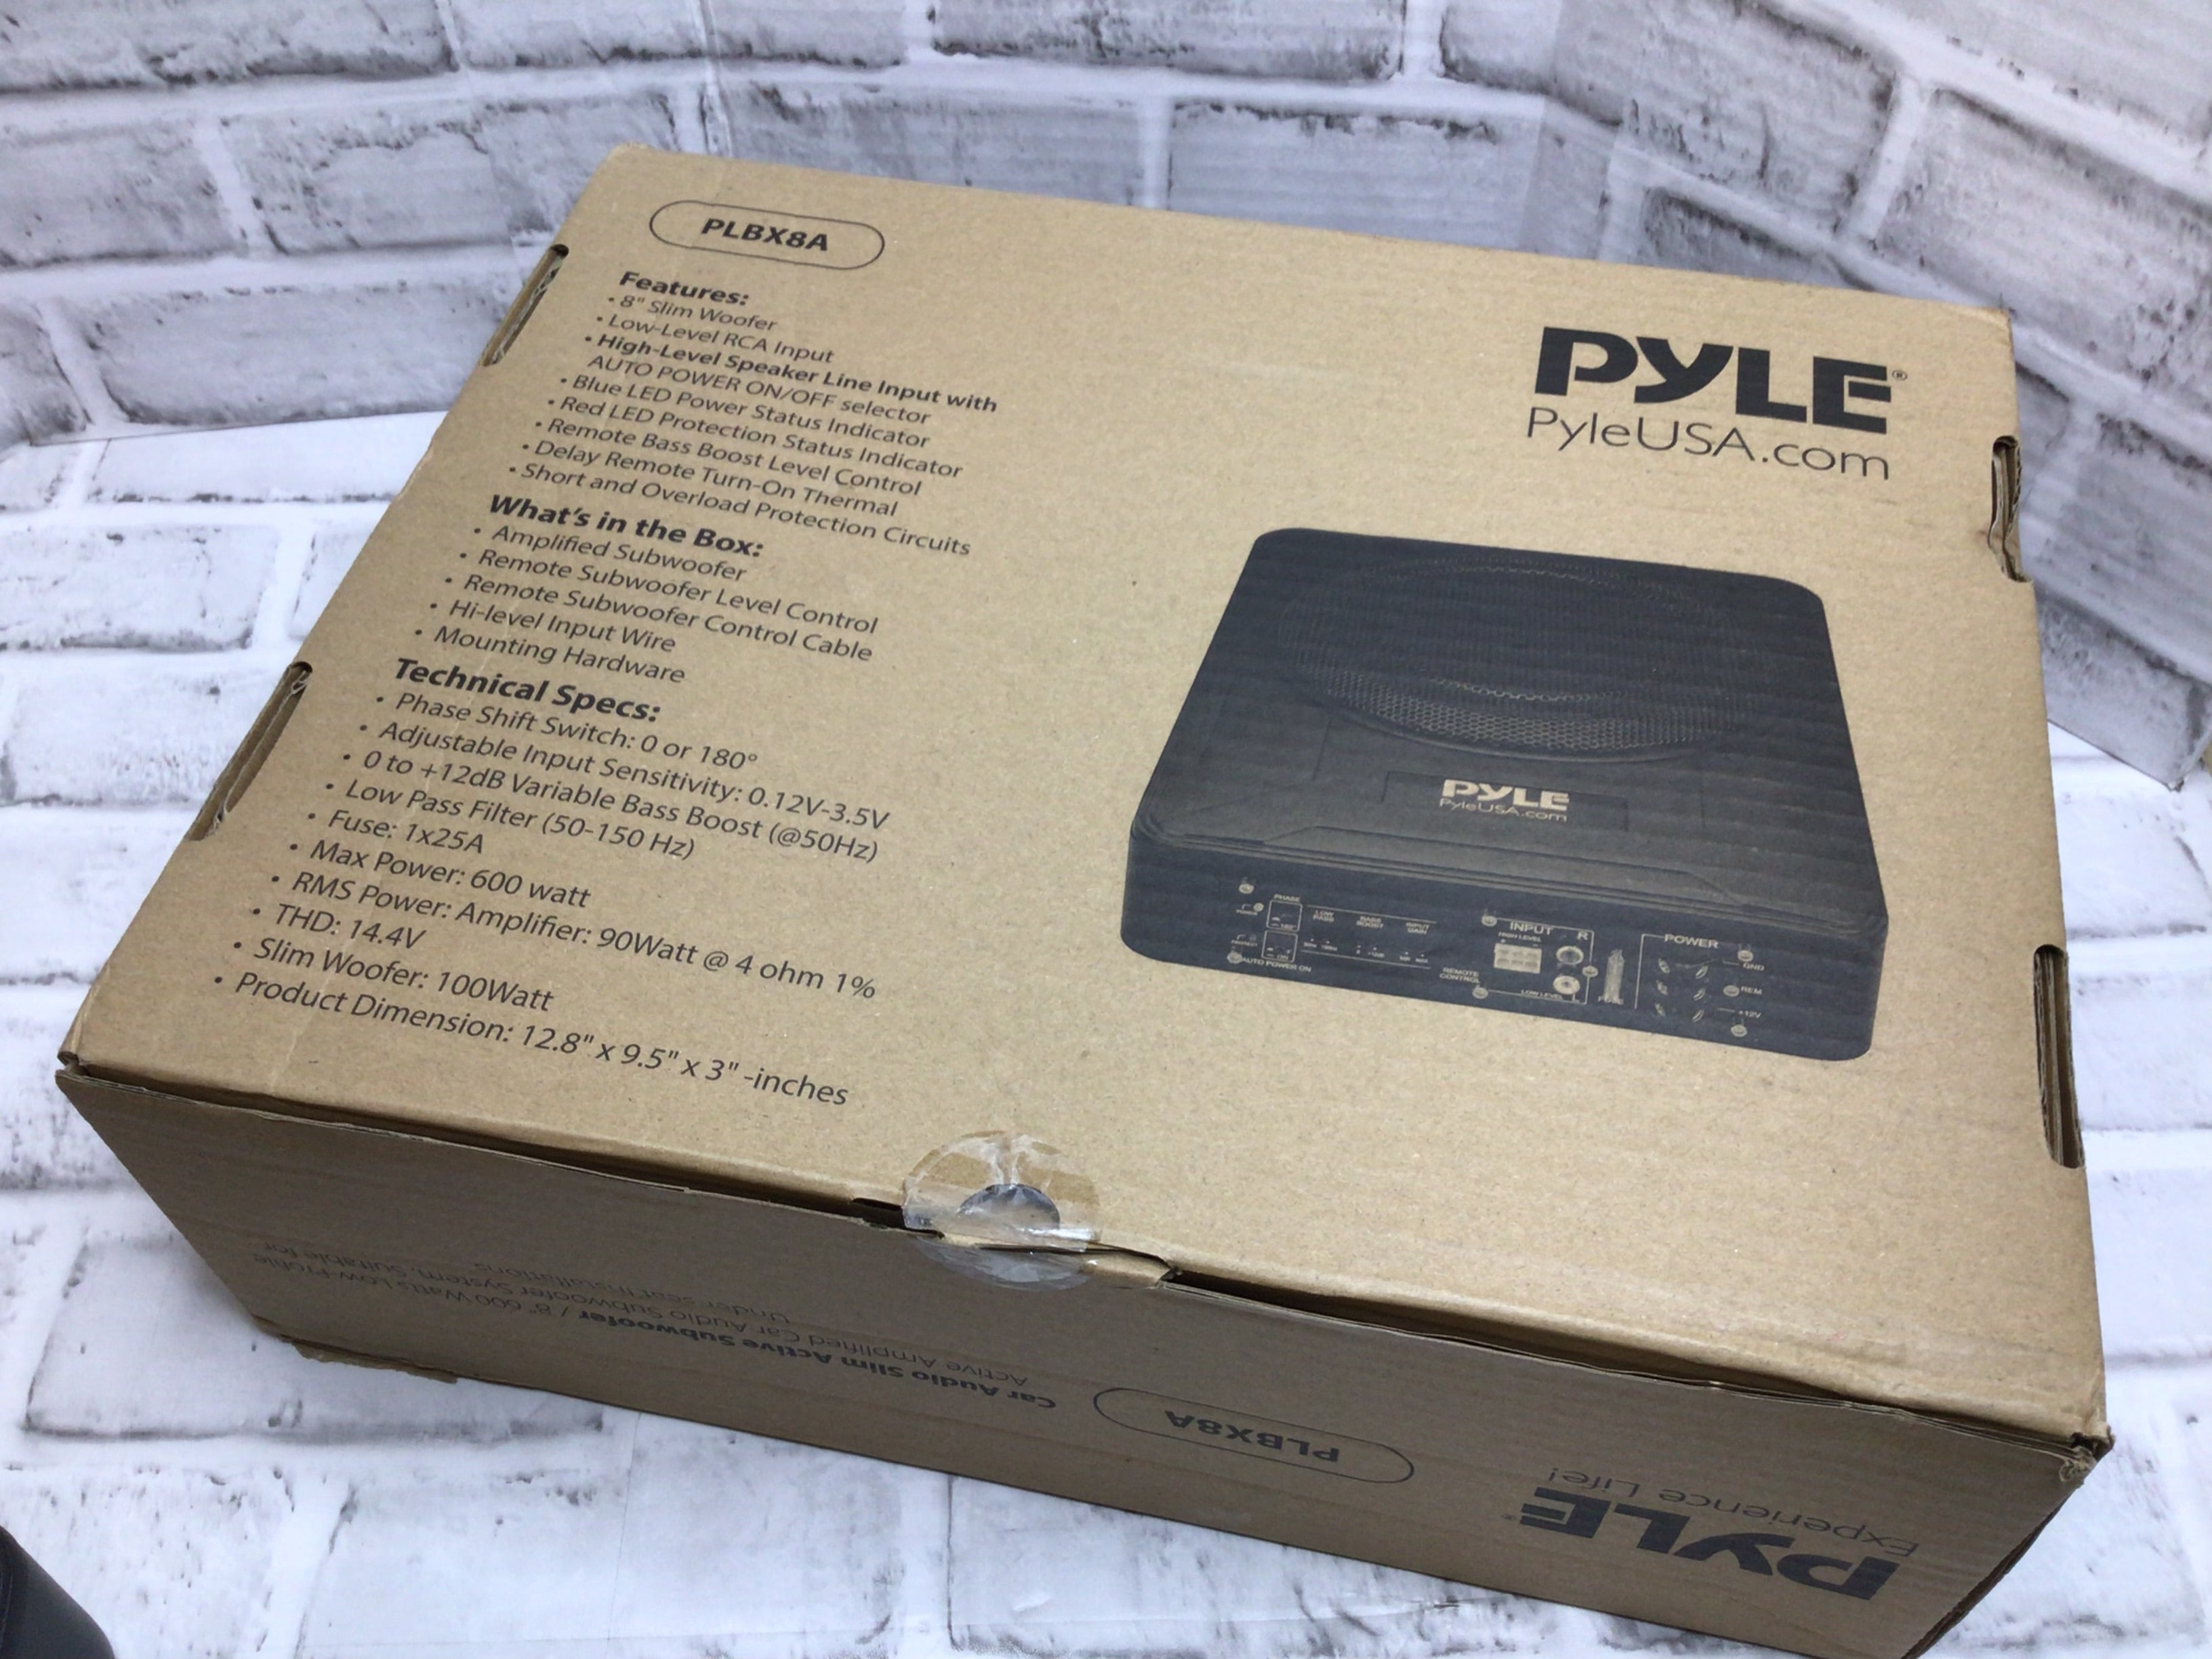 Pyle PLBX8A 8-Inch Low-Profile Amplified Subwoofer System - 600 Watt Compact (8081906204910)